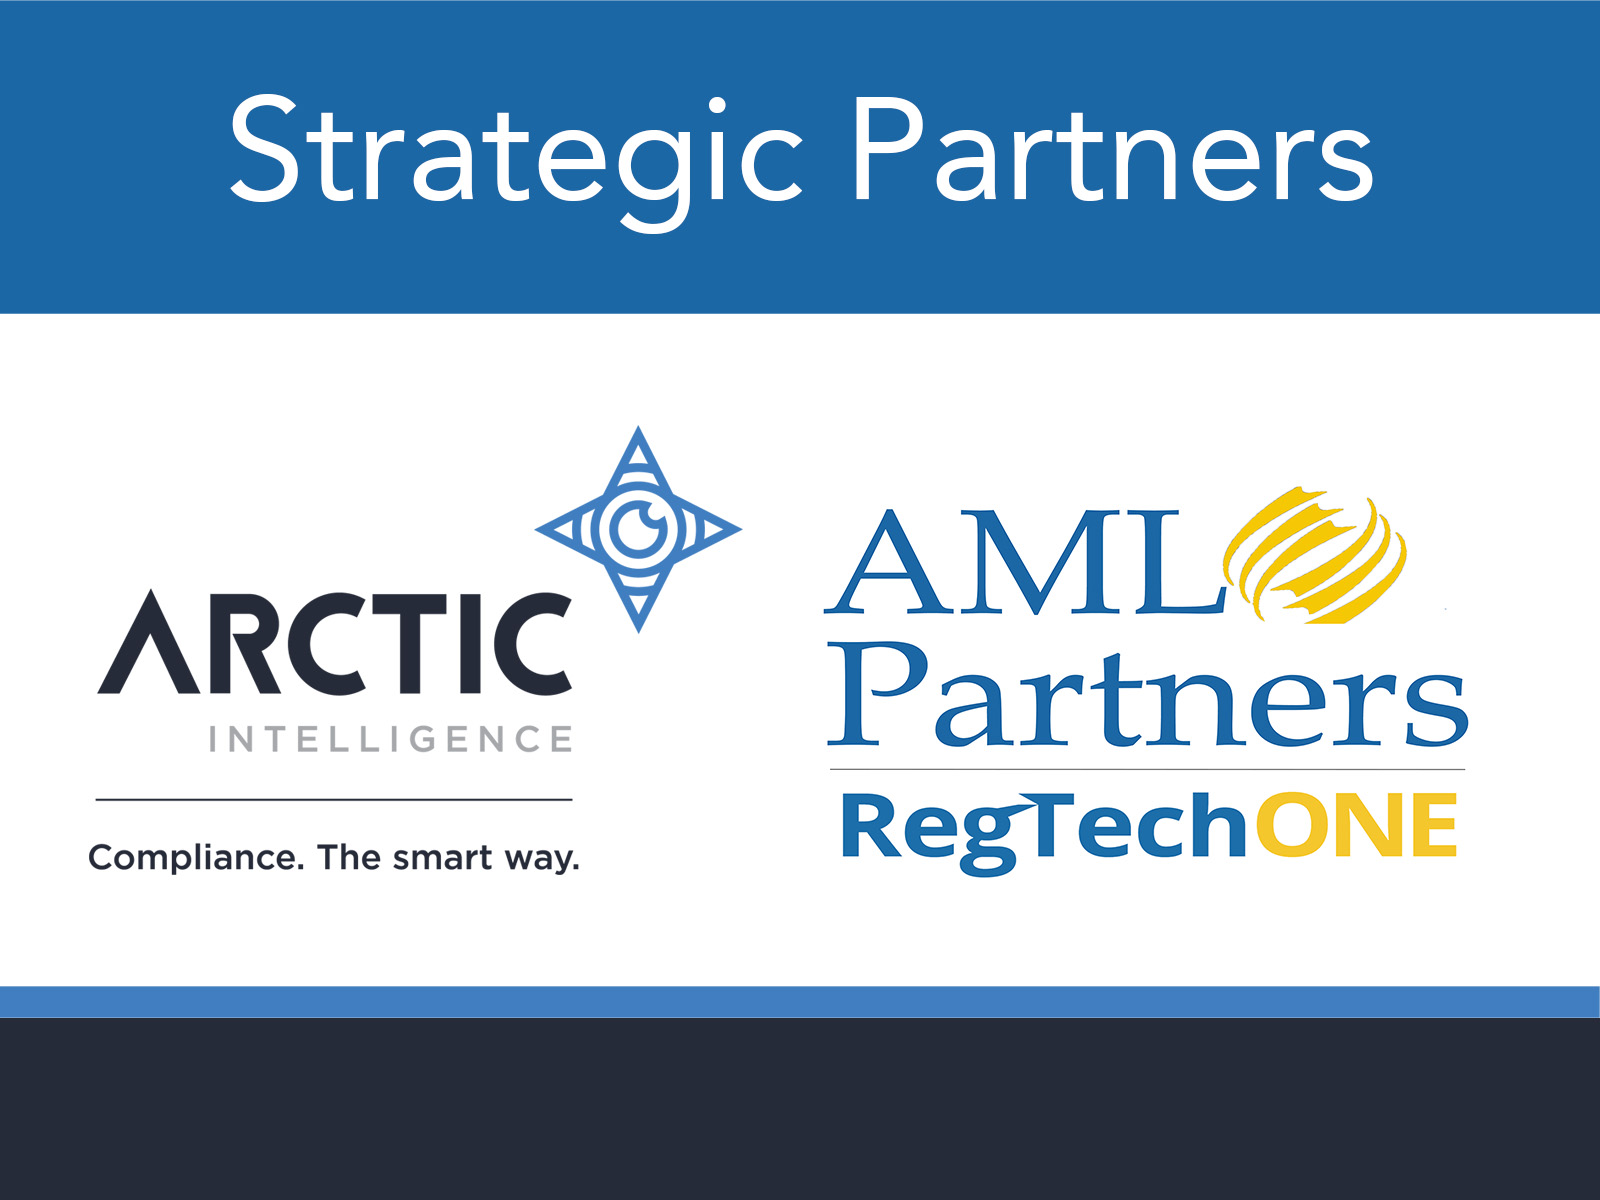 Logos for Arctic Intelligence and AML Partners LLC--Strategic Partners in Compliance and Risk Mitigation